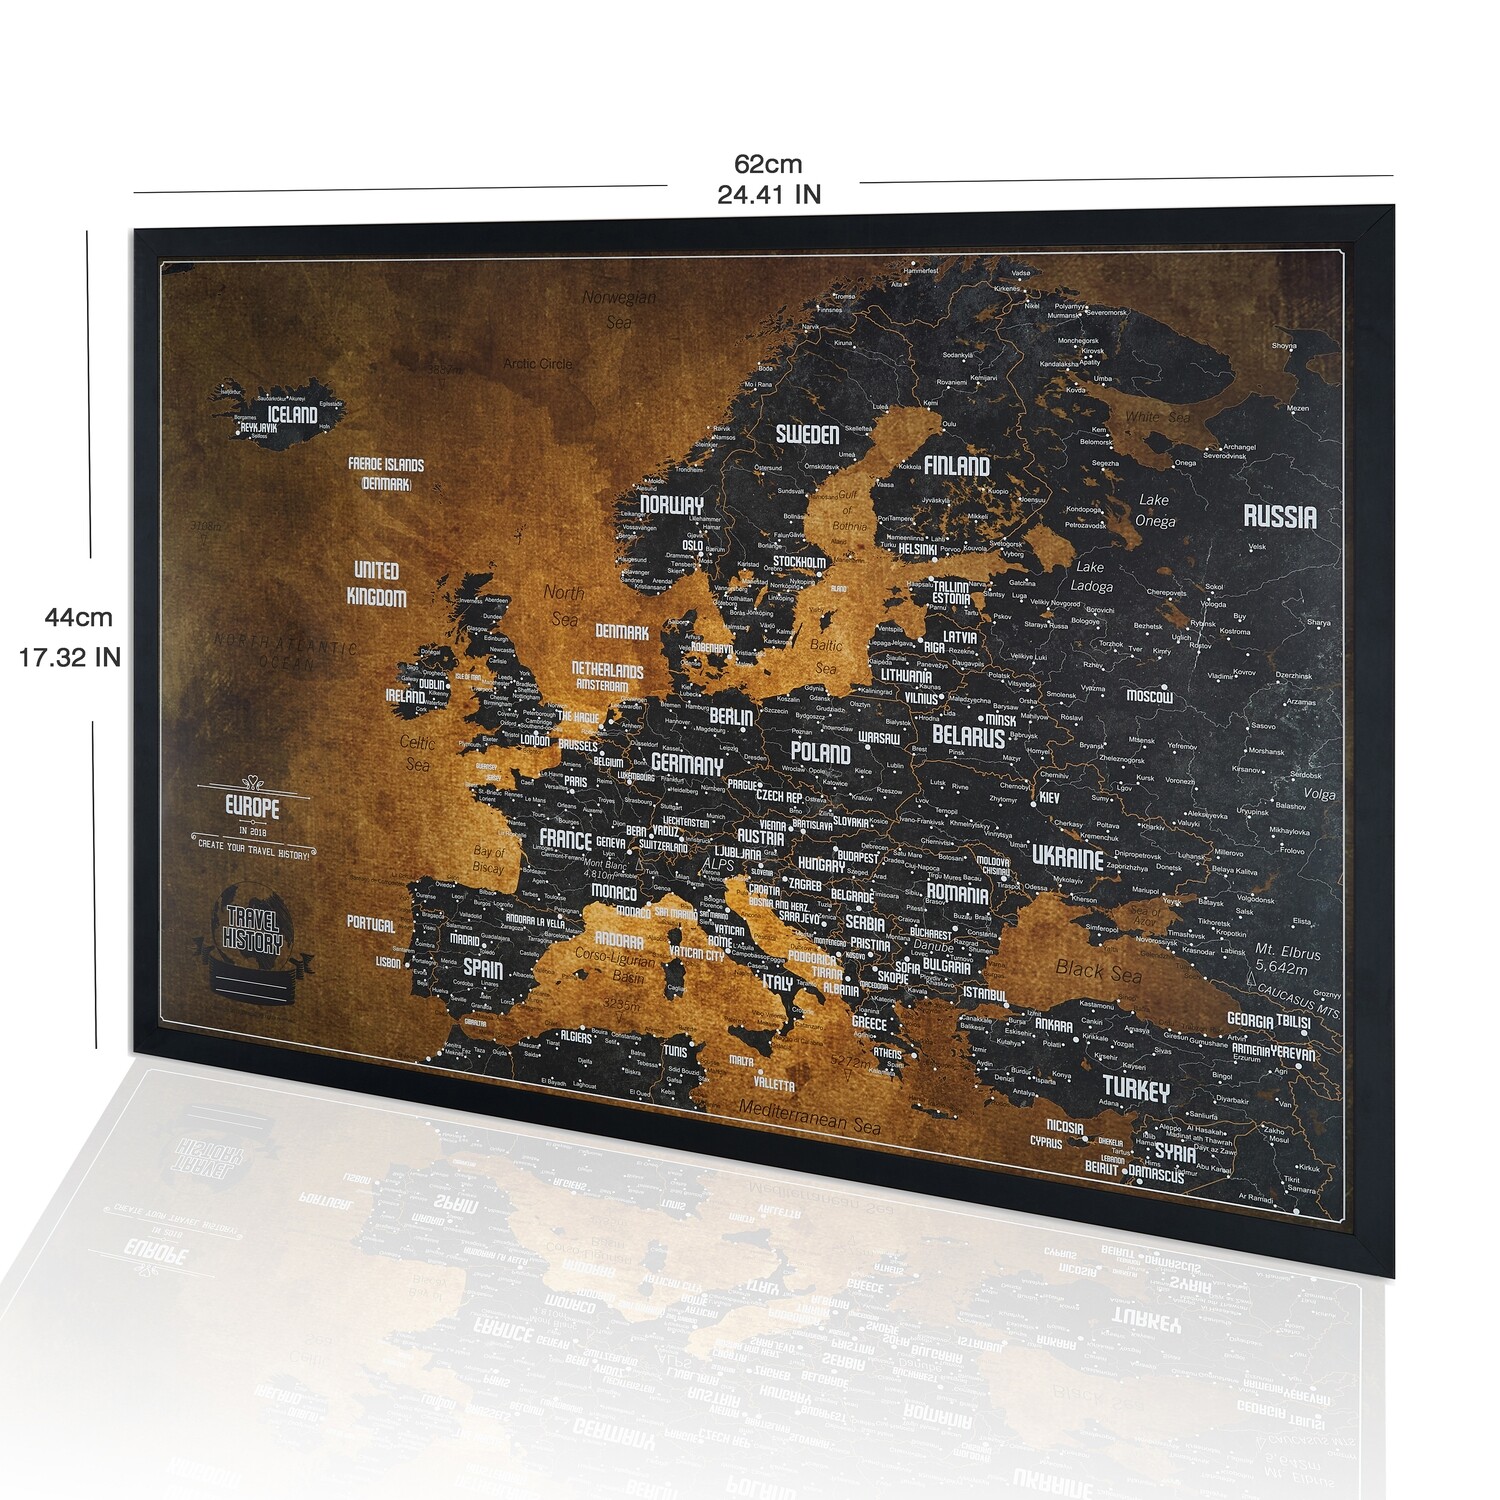 Europe Map Push Pin - Europe Map Wall Art - Includes 600 Biggest Cities - Explore Europe Map with Pins ready to hang - Push Pin Travel Map